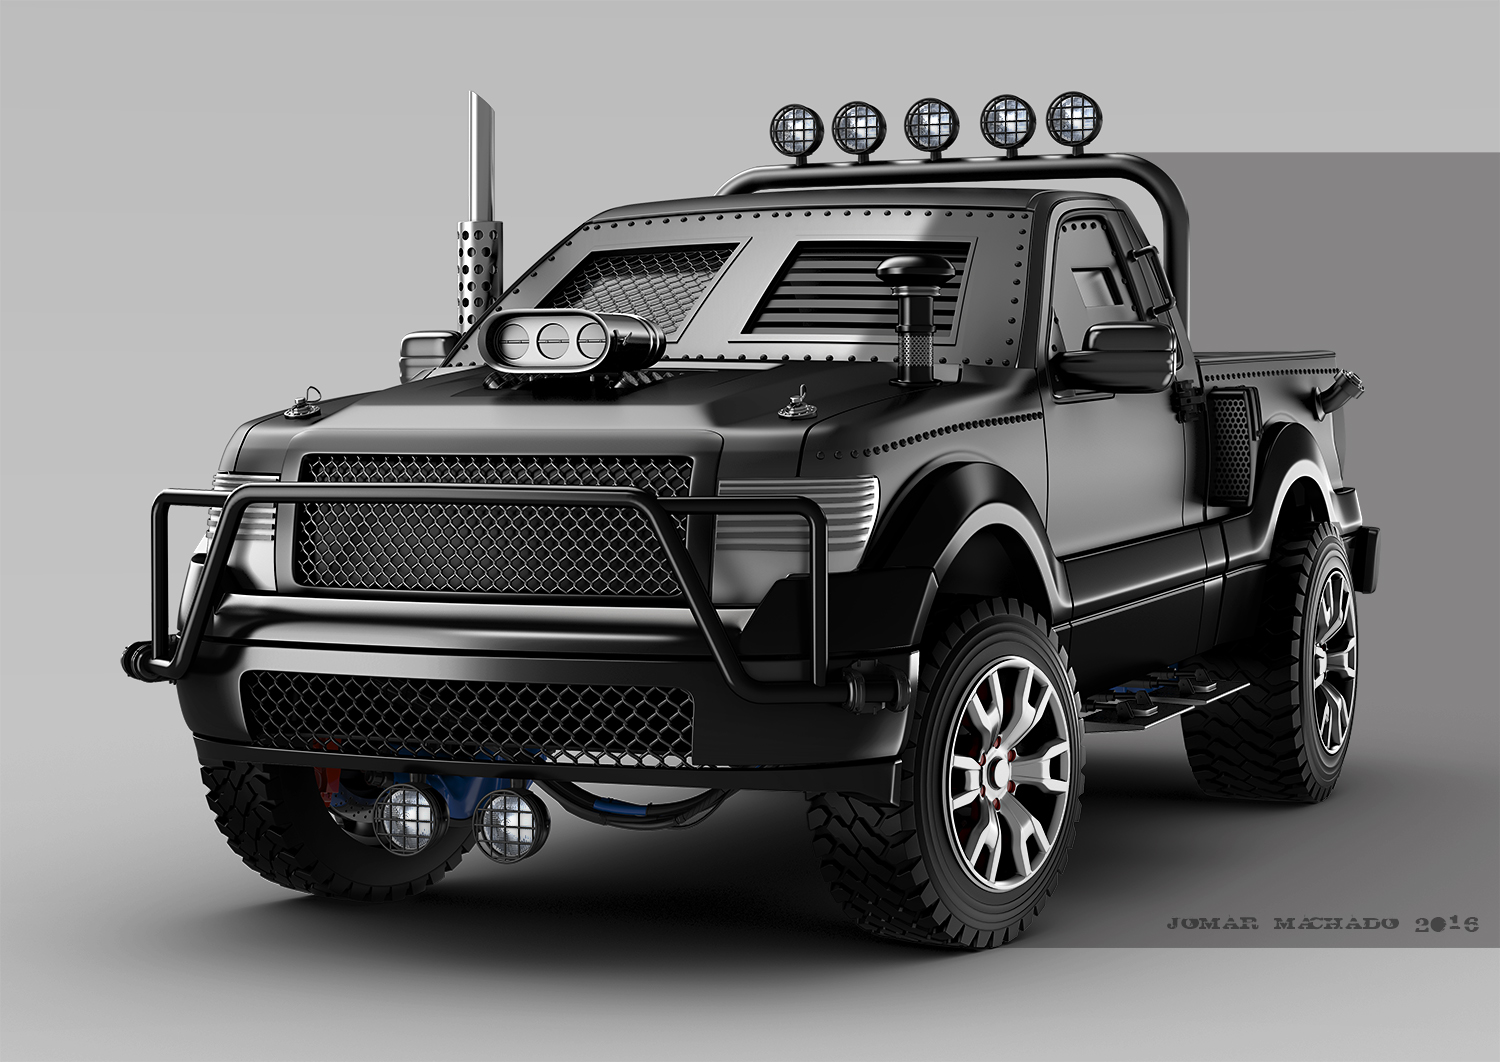 3D WORKS: PICK UP 4X4